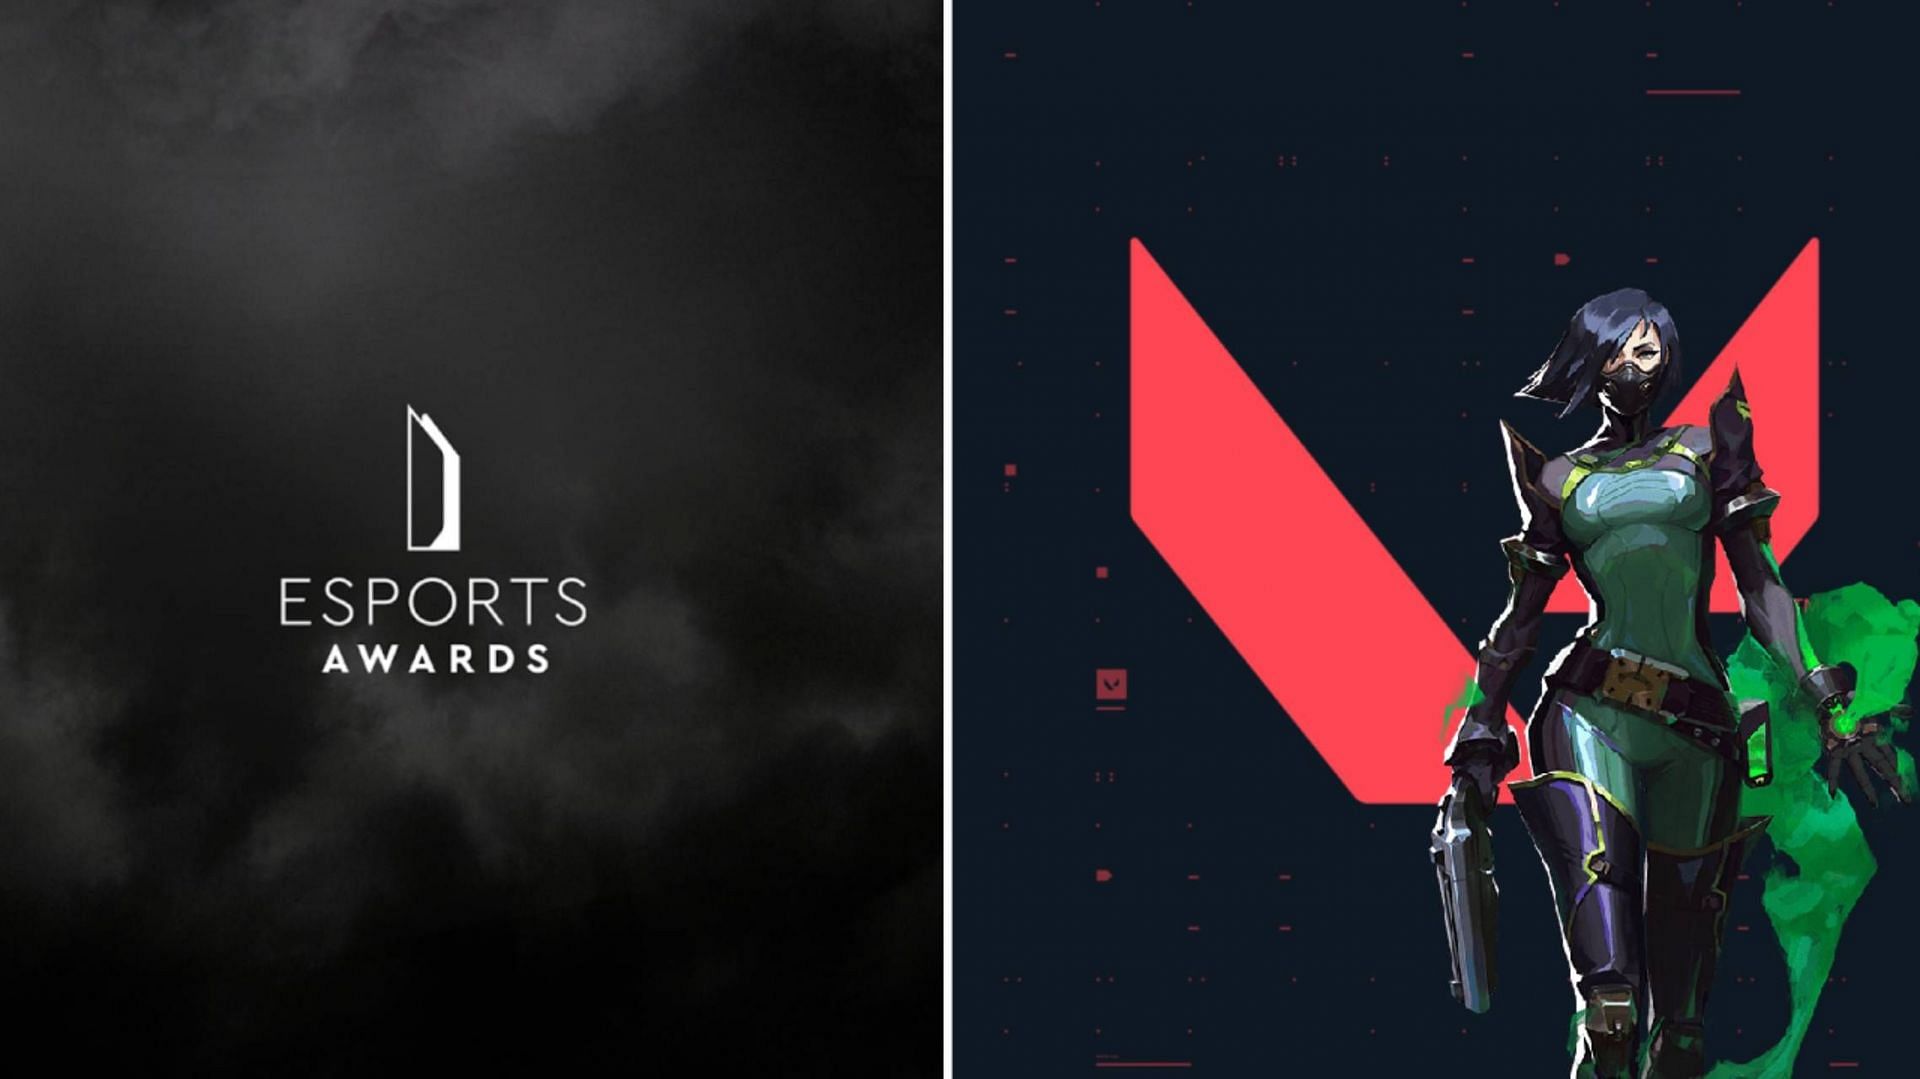 One more for Valorant: Valorant wins the Esports Game of the Year 2022